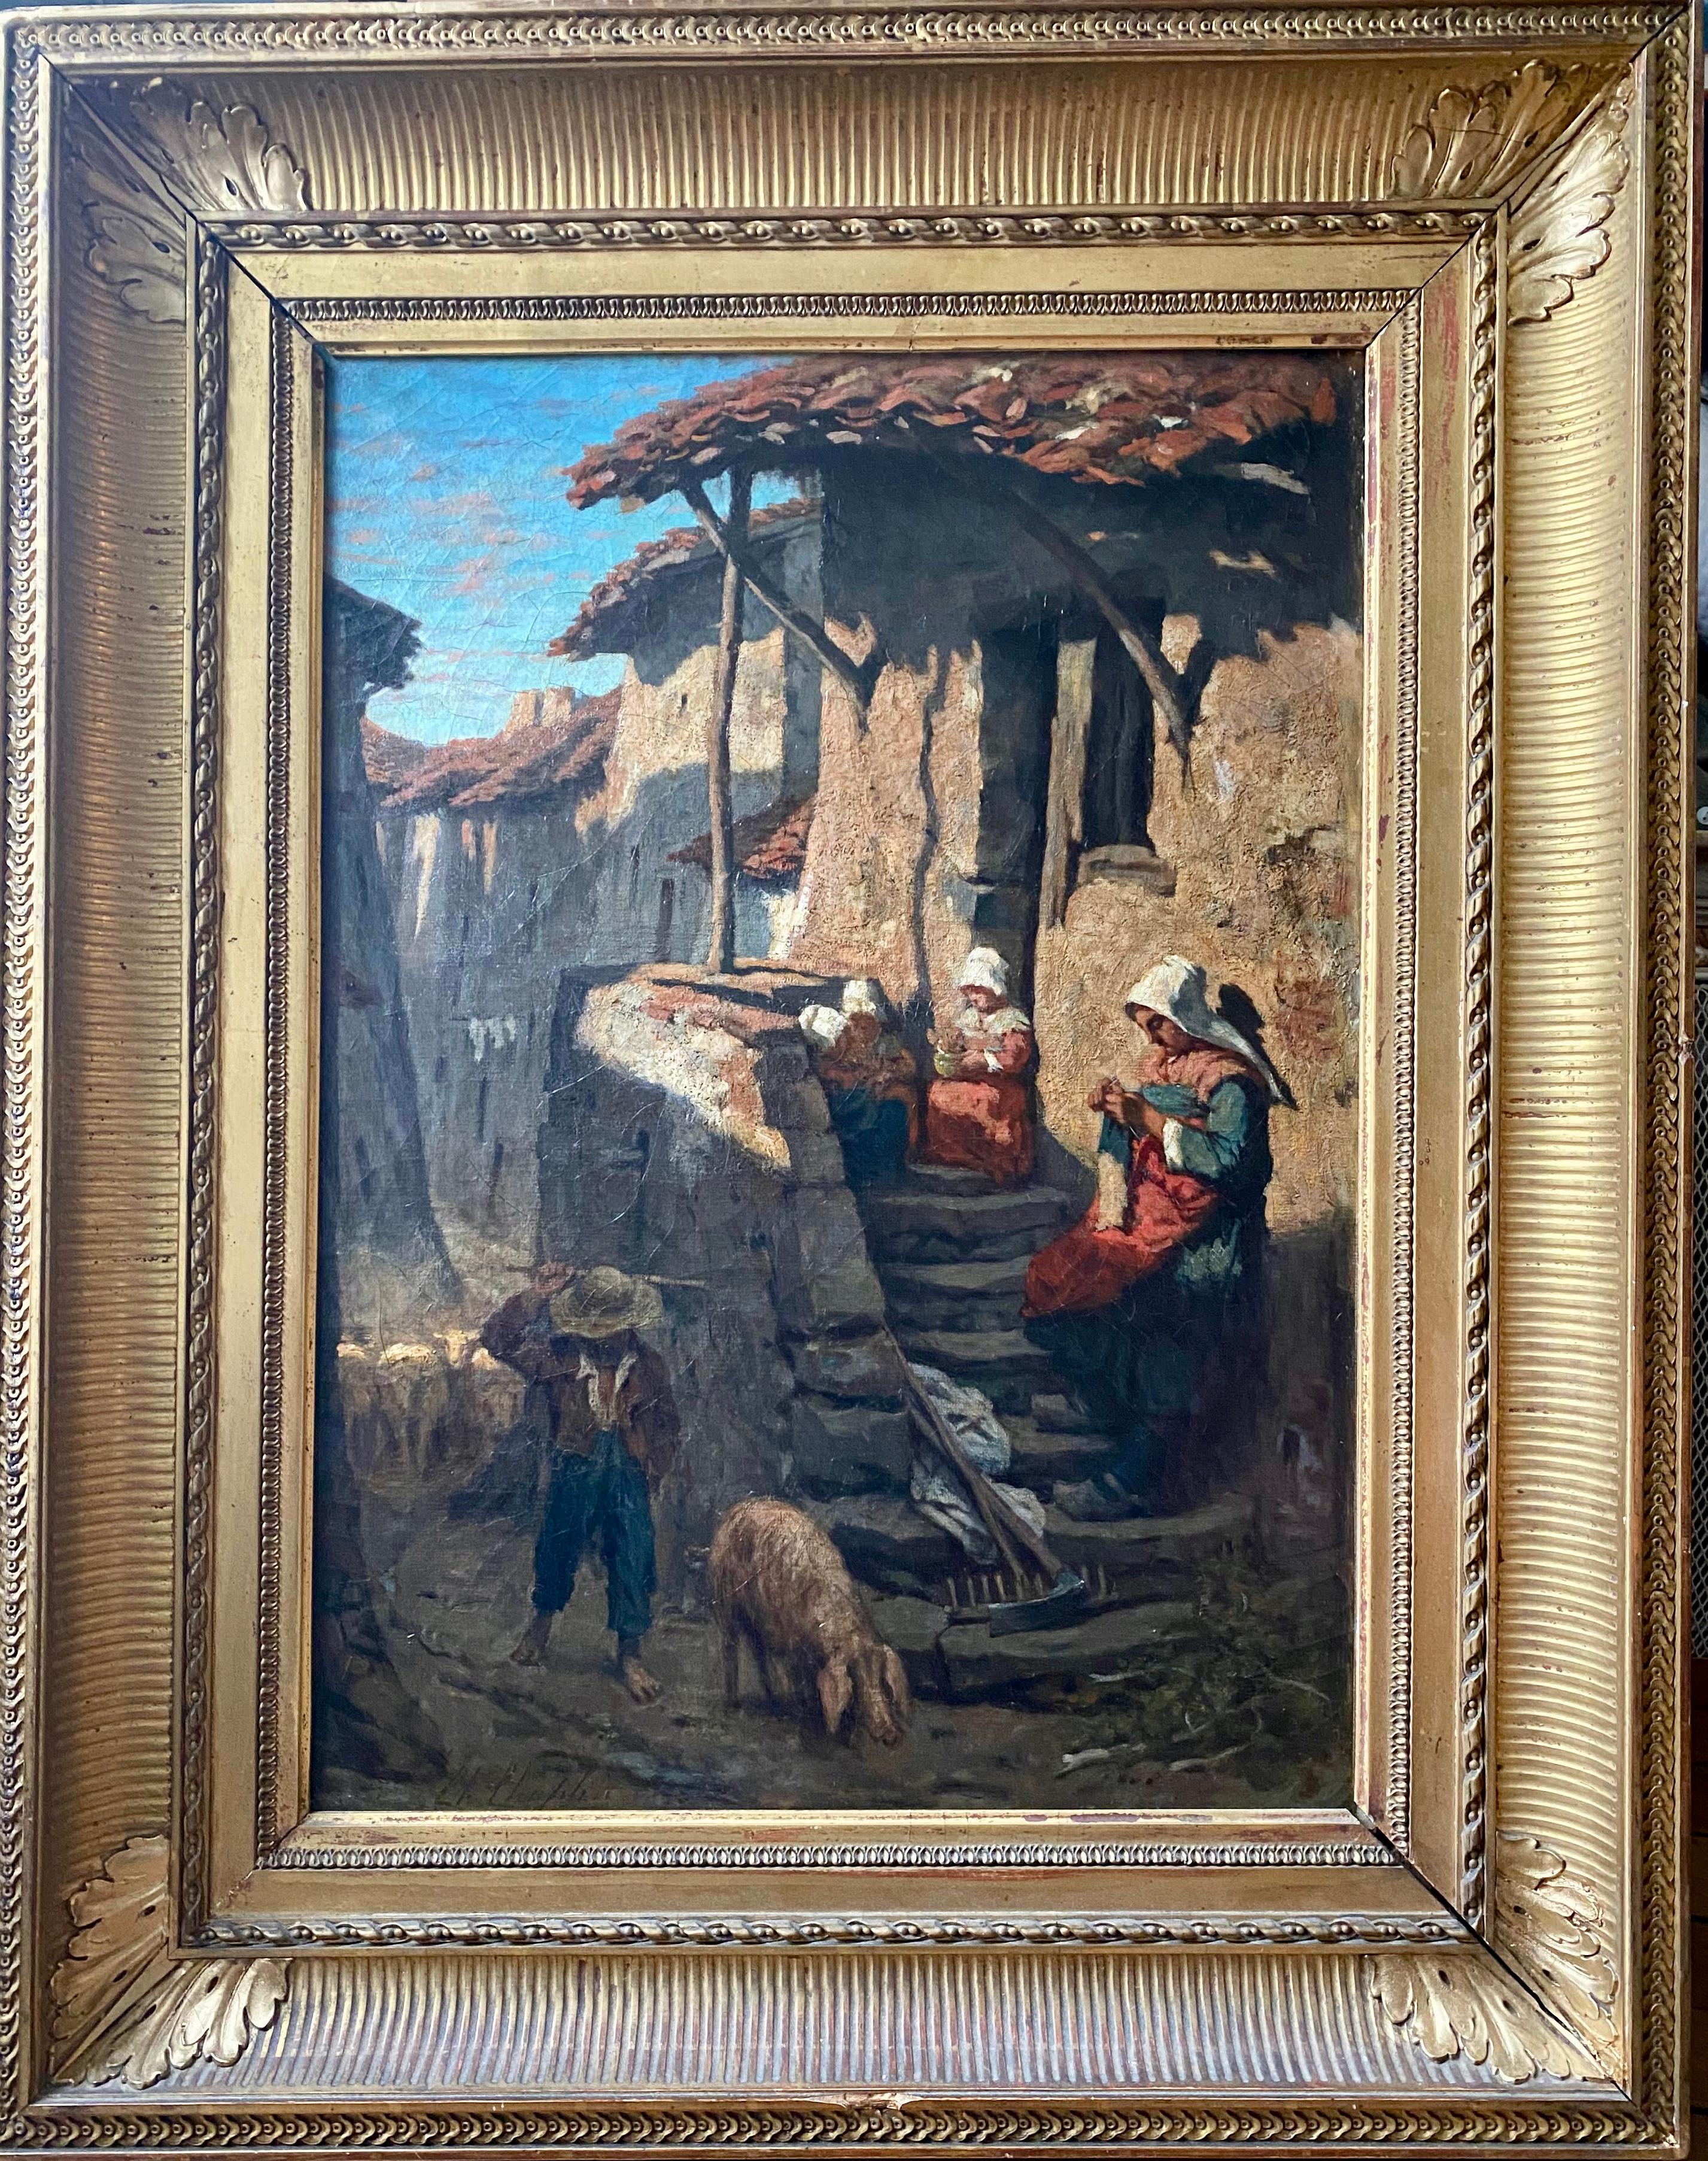 Rural Life in Summer: 19th C Island Village Scene, Figures and Animals painting